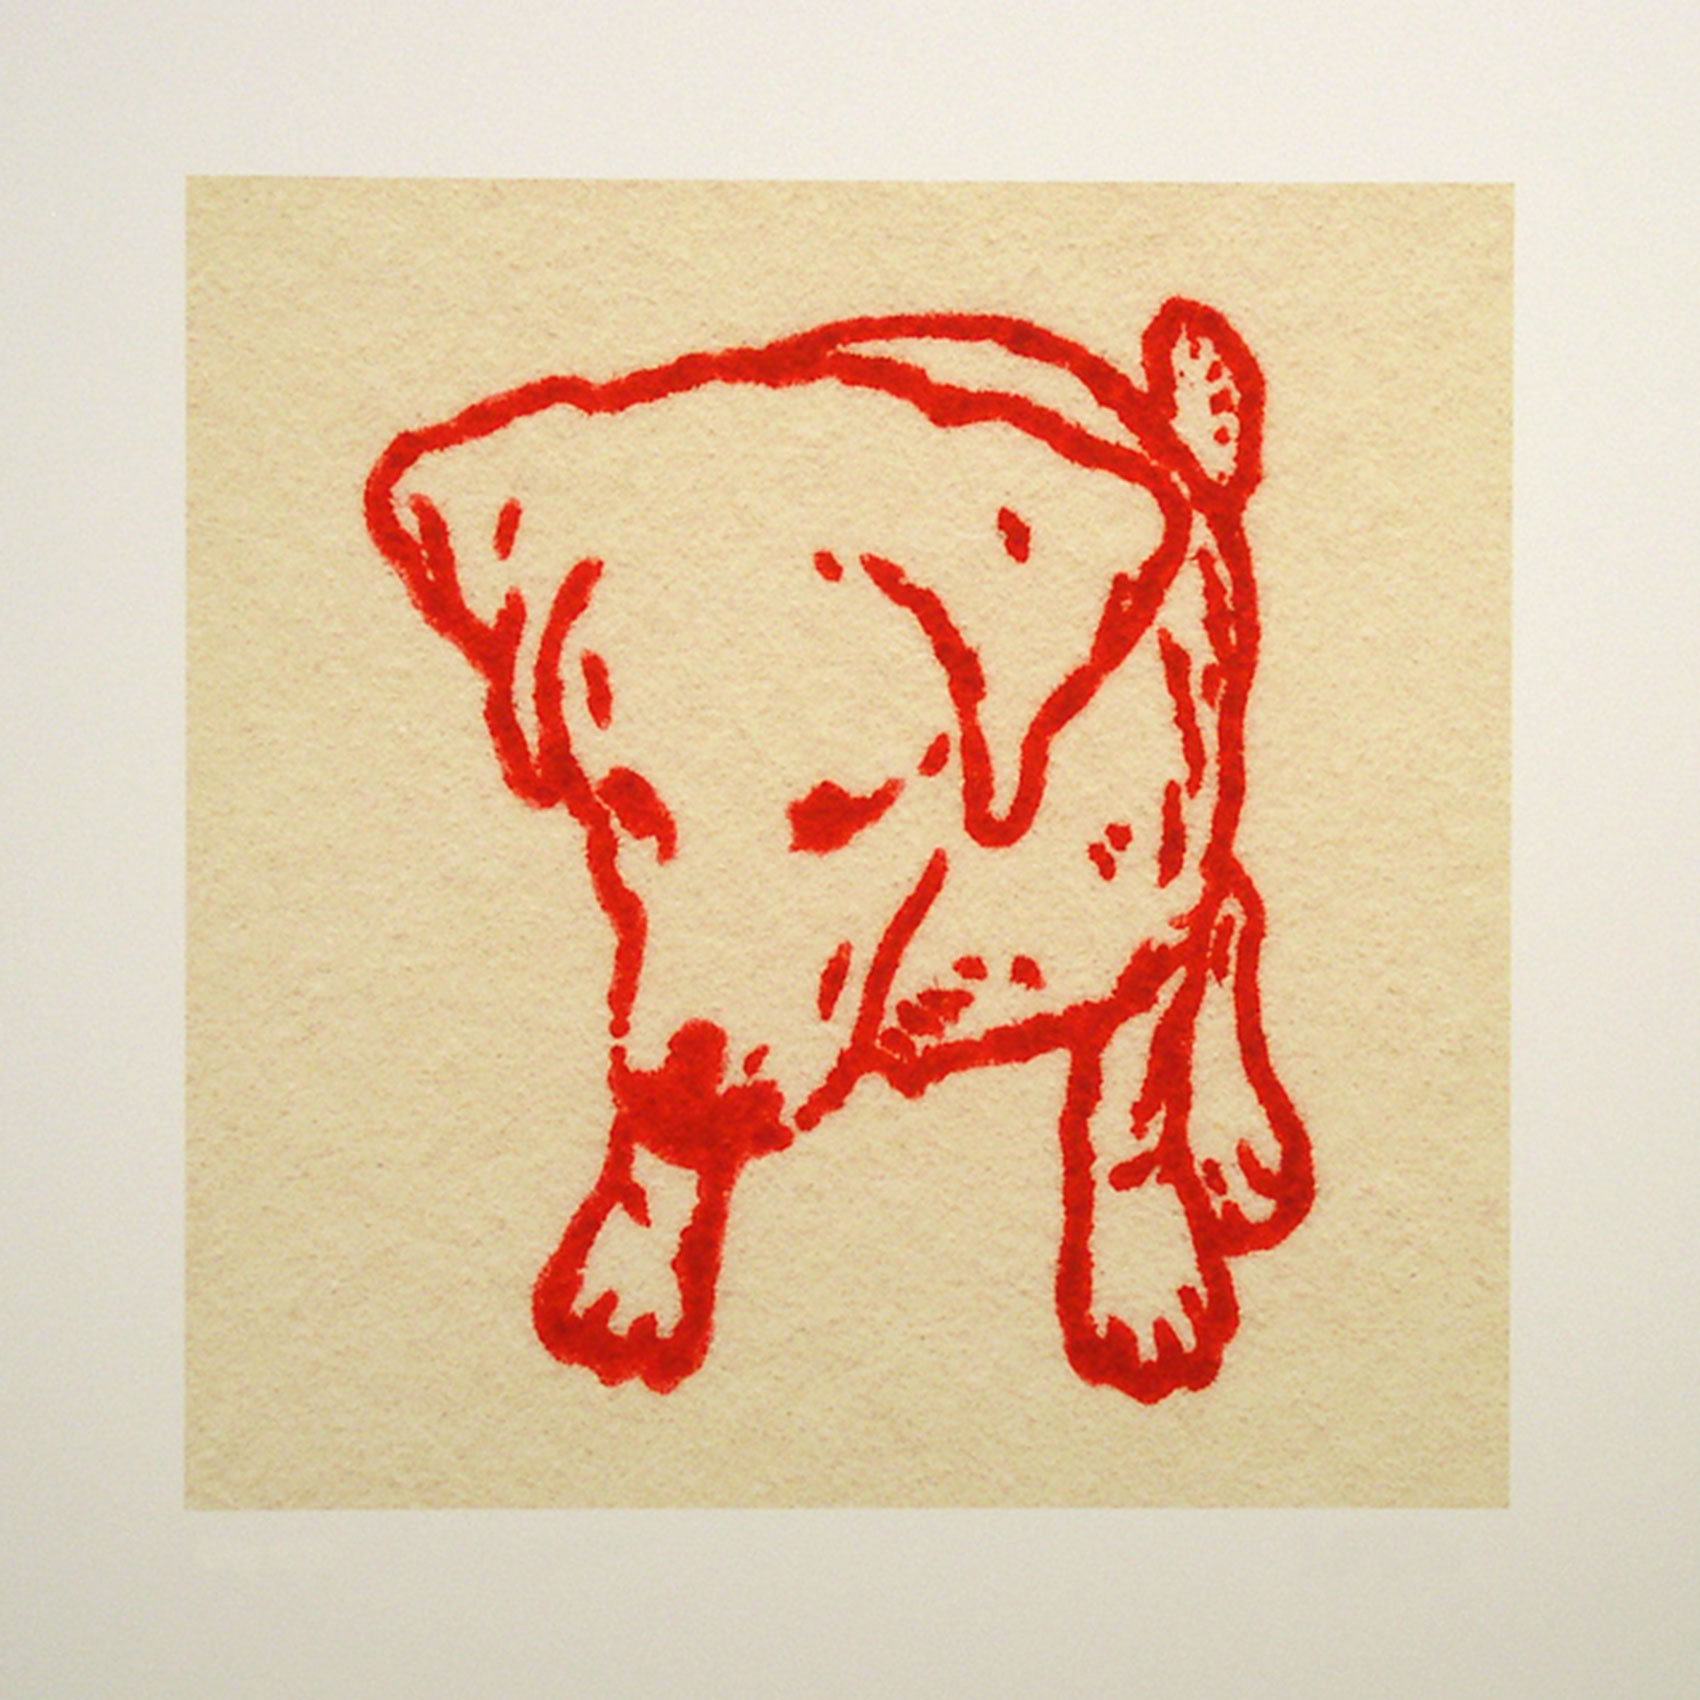 Eloise; red; 2007; image size 10" x 10"